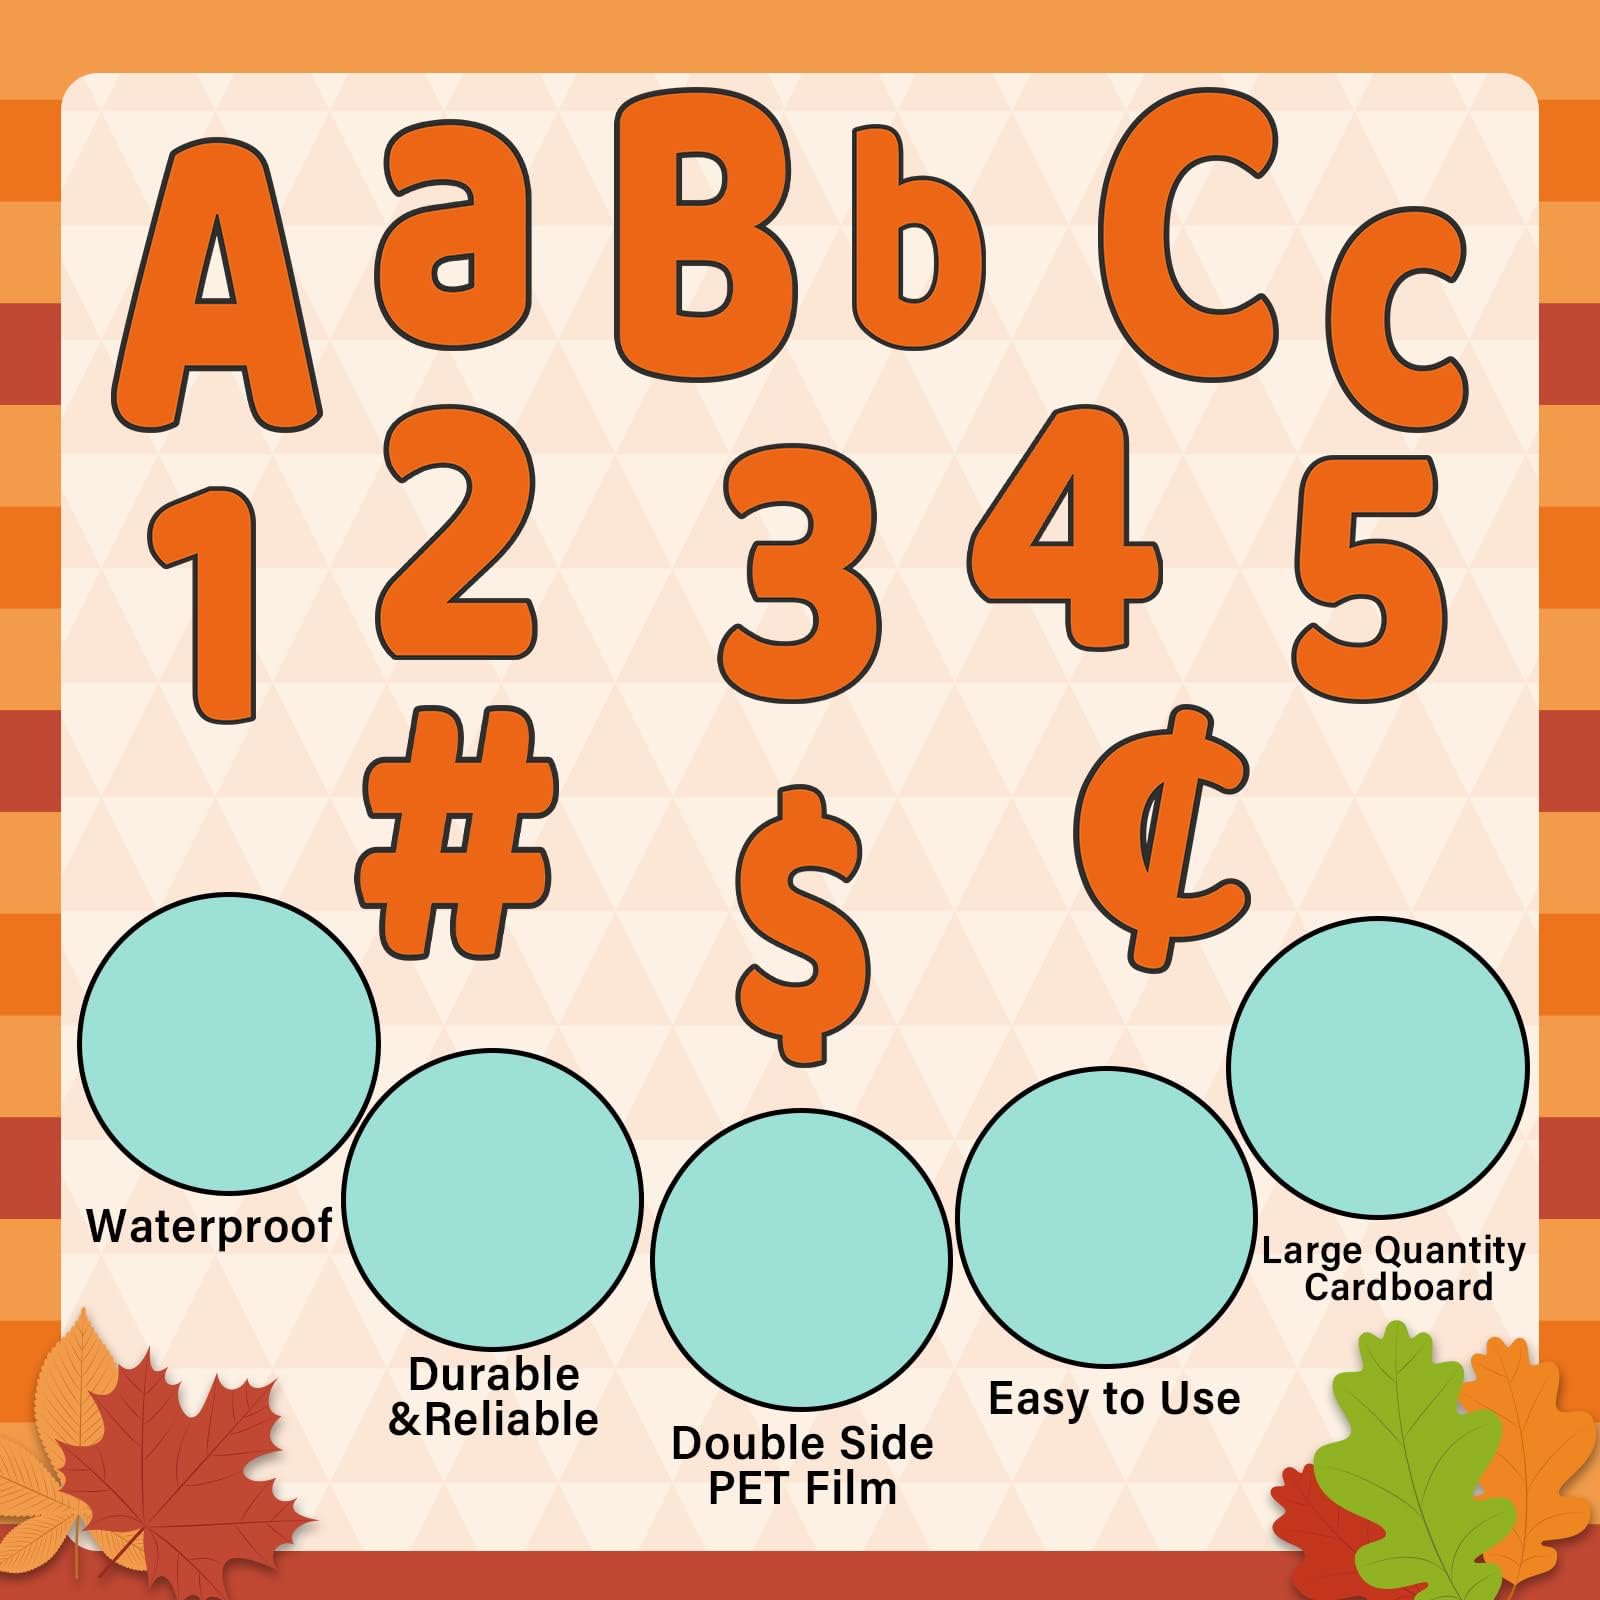 266 Pcs Letters Combo Pack Set Thanksgiving Fall Chalkboard Classroom Letters Orange Bulletin Board Letter and Number Accents for Home School Classroom Decor